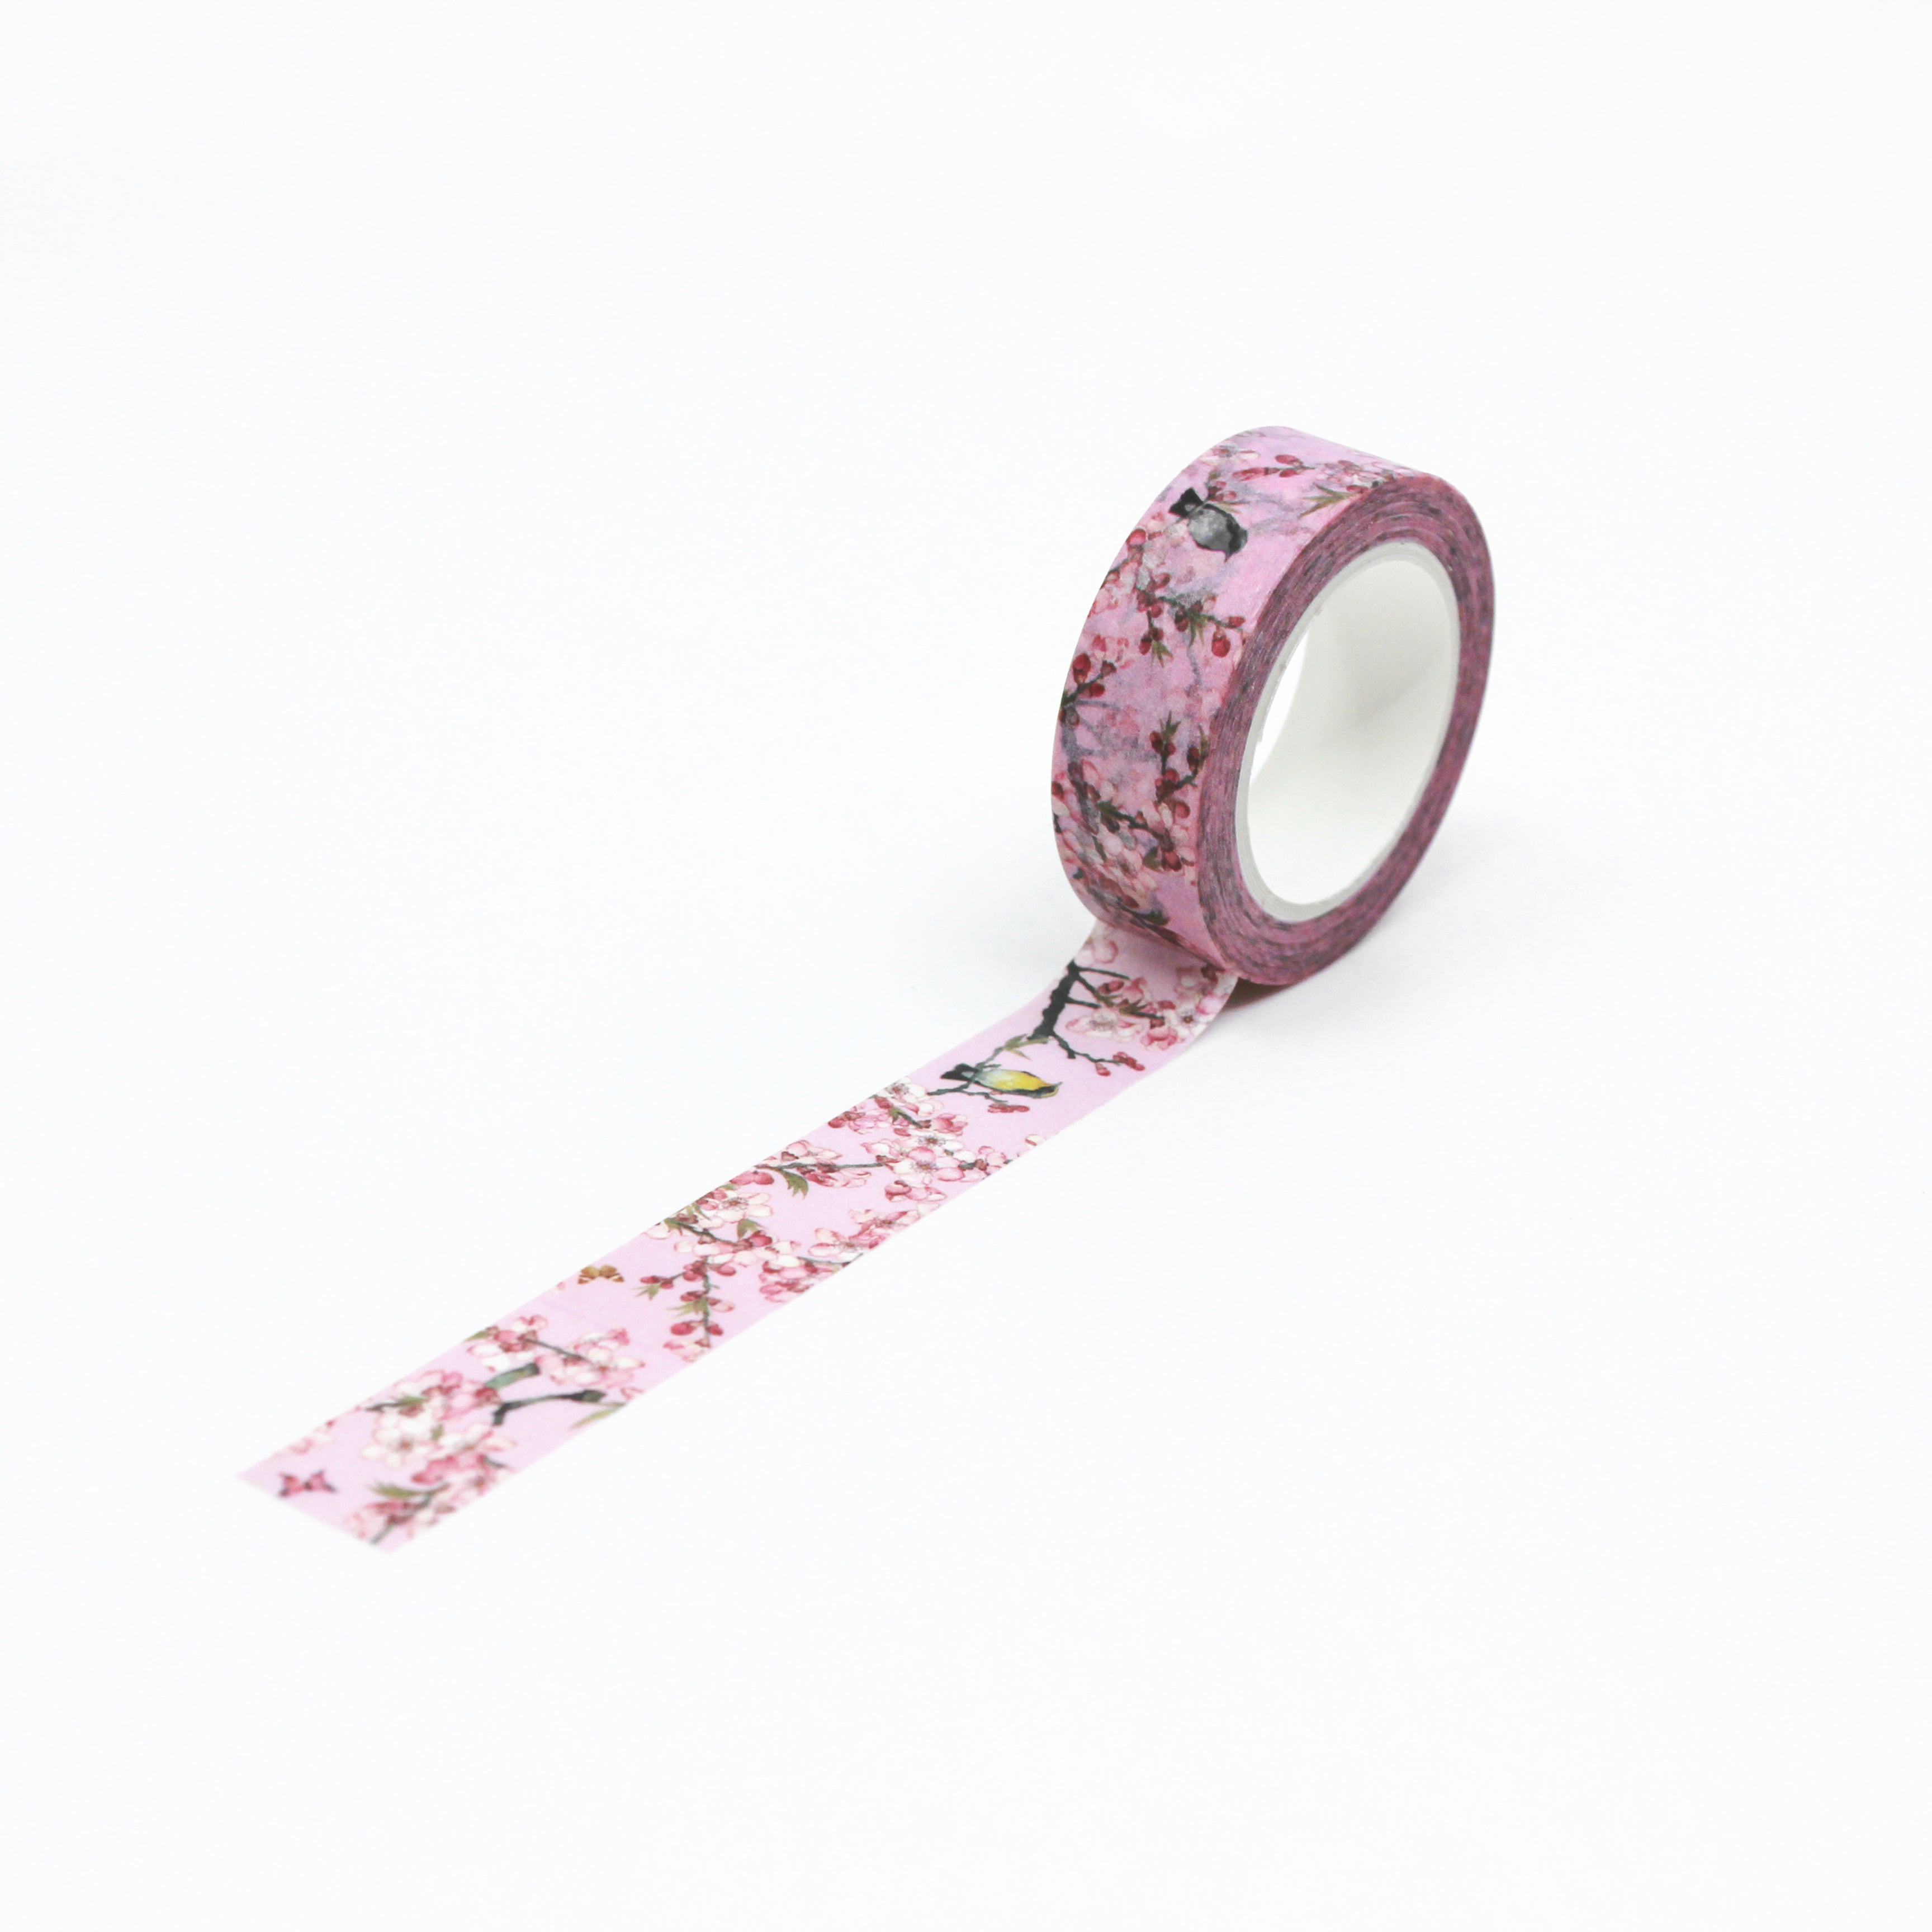 Elevate your crafts with our Birds & Cherry Blossoms Pink Floral Washi Tape, featuring graceful bird and cherry blossom illustrations. Ideal for adding a touch of delicate beauty and serenity to your projects. This tape is sold at BBB Supplies Craft Shop.